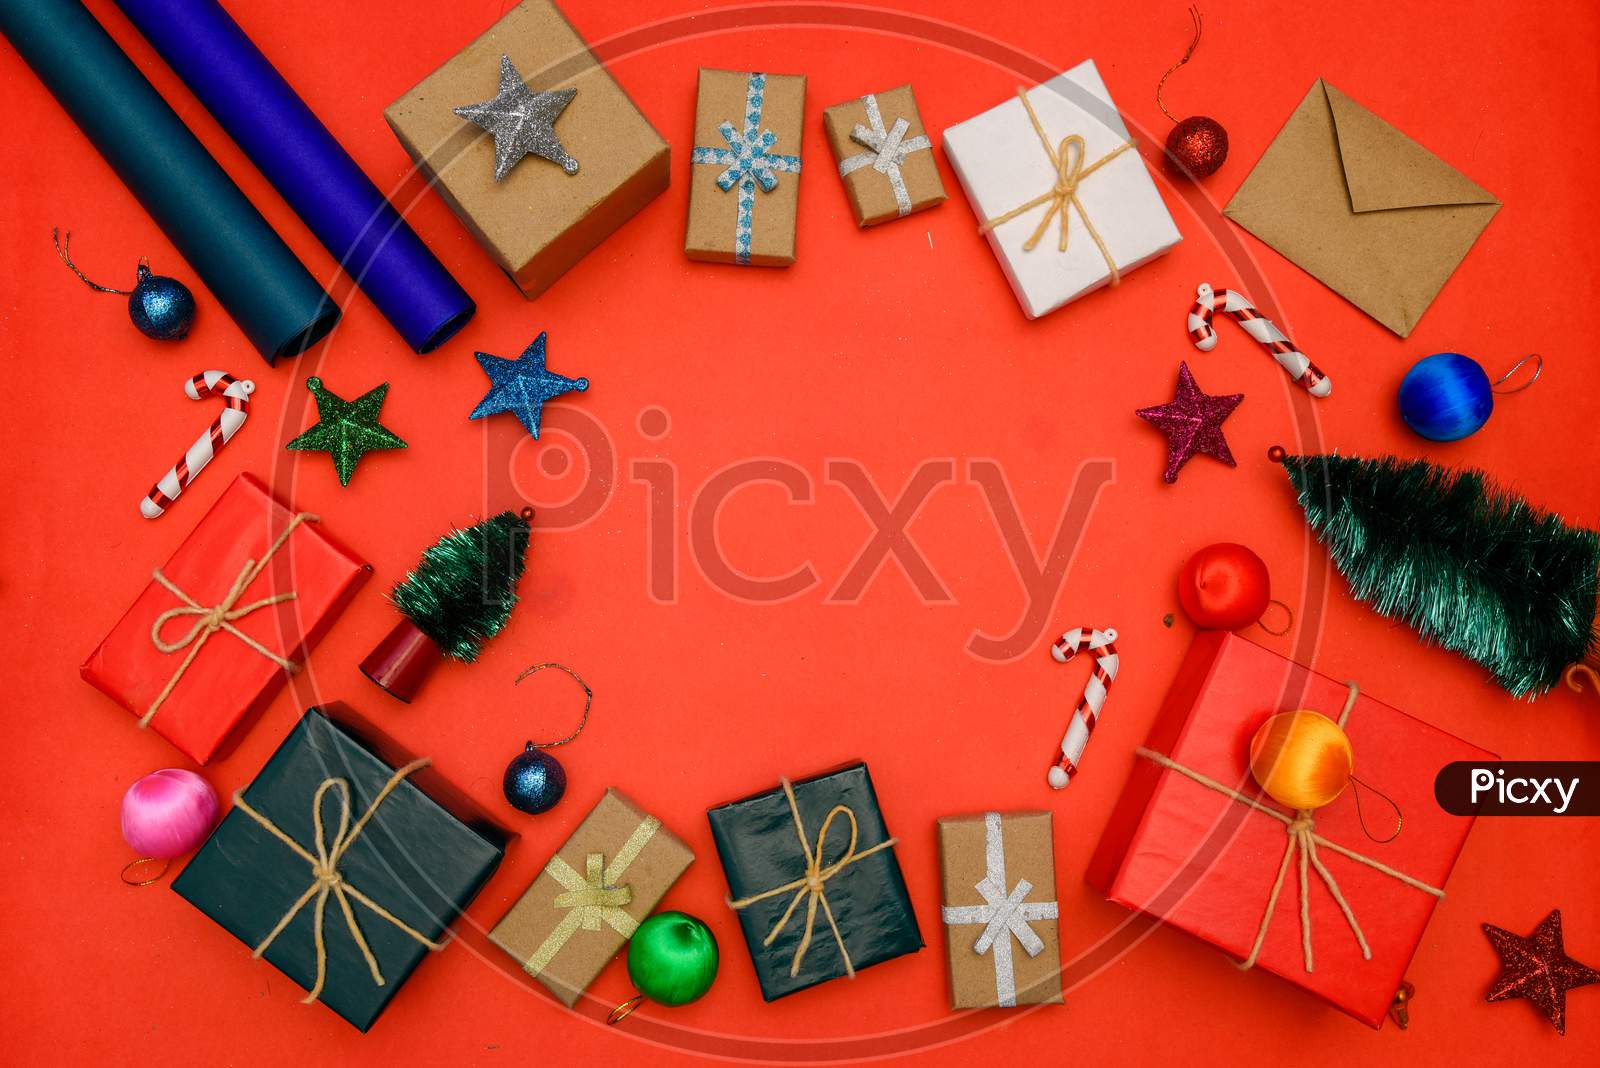 Christmas background with gift boxes, clews of rope, paper's rools and decorations on red. Preparation for holidays. Top view with copy space.